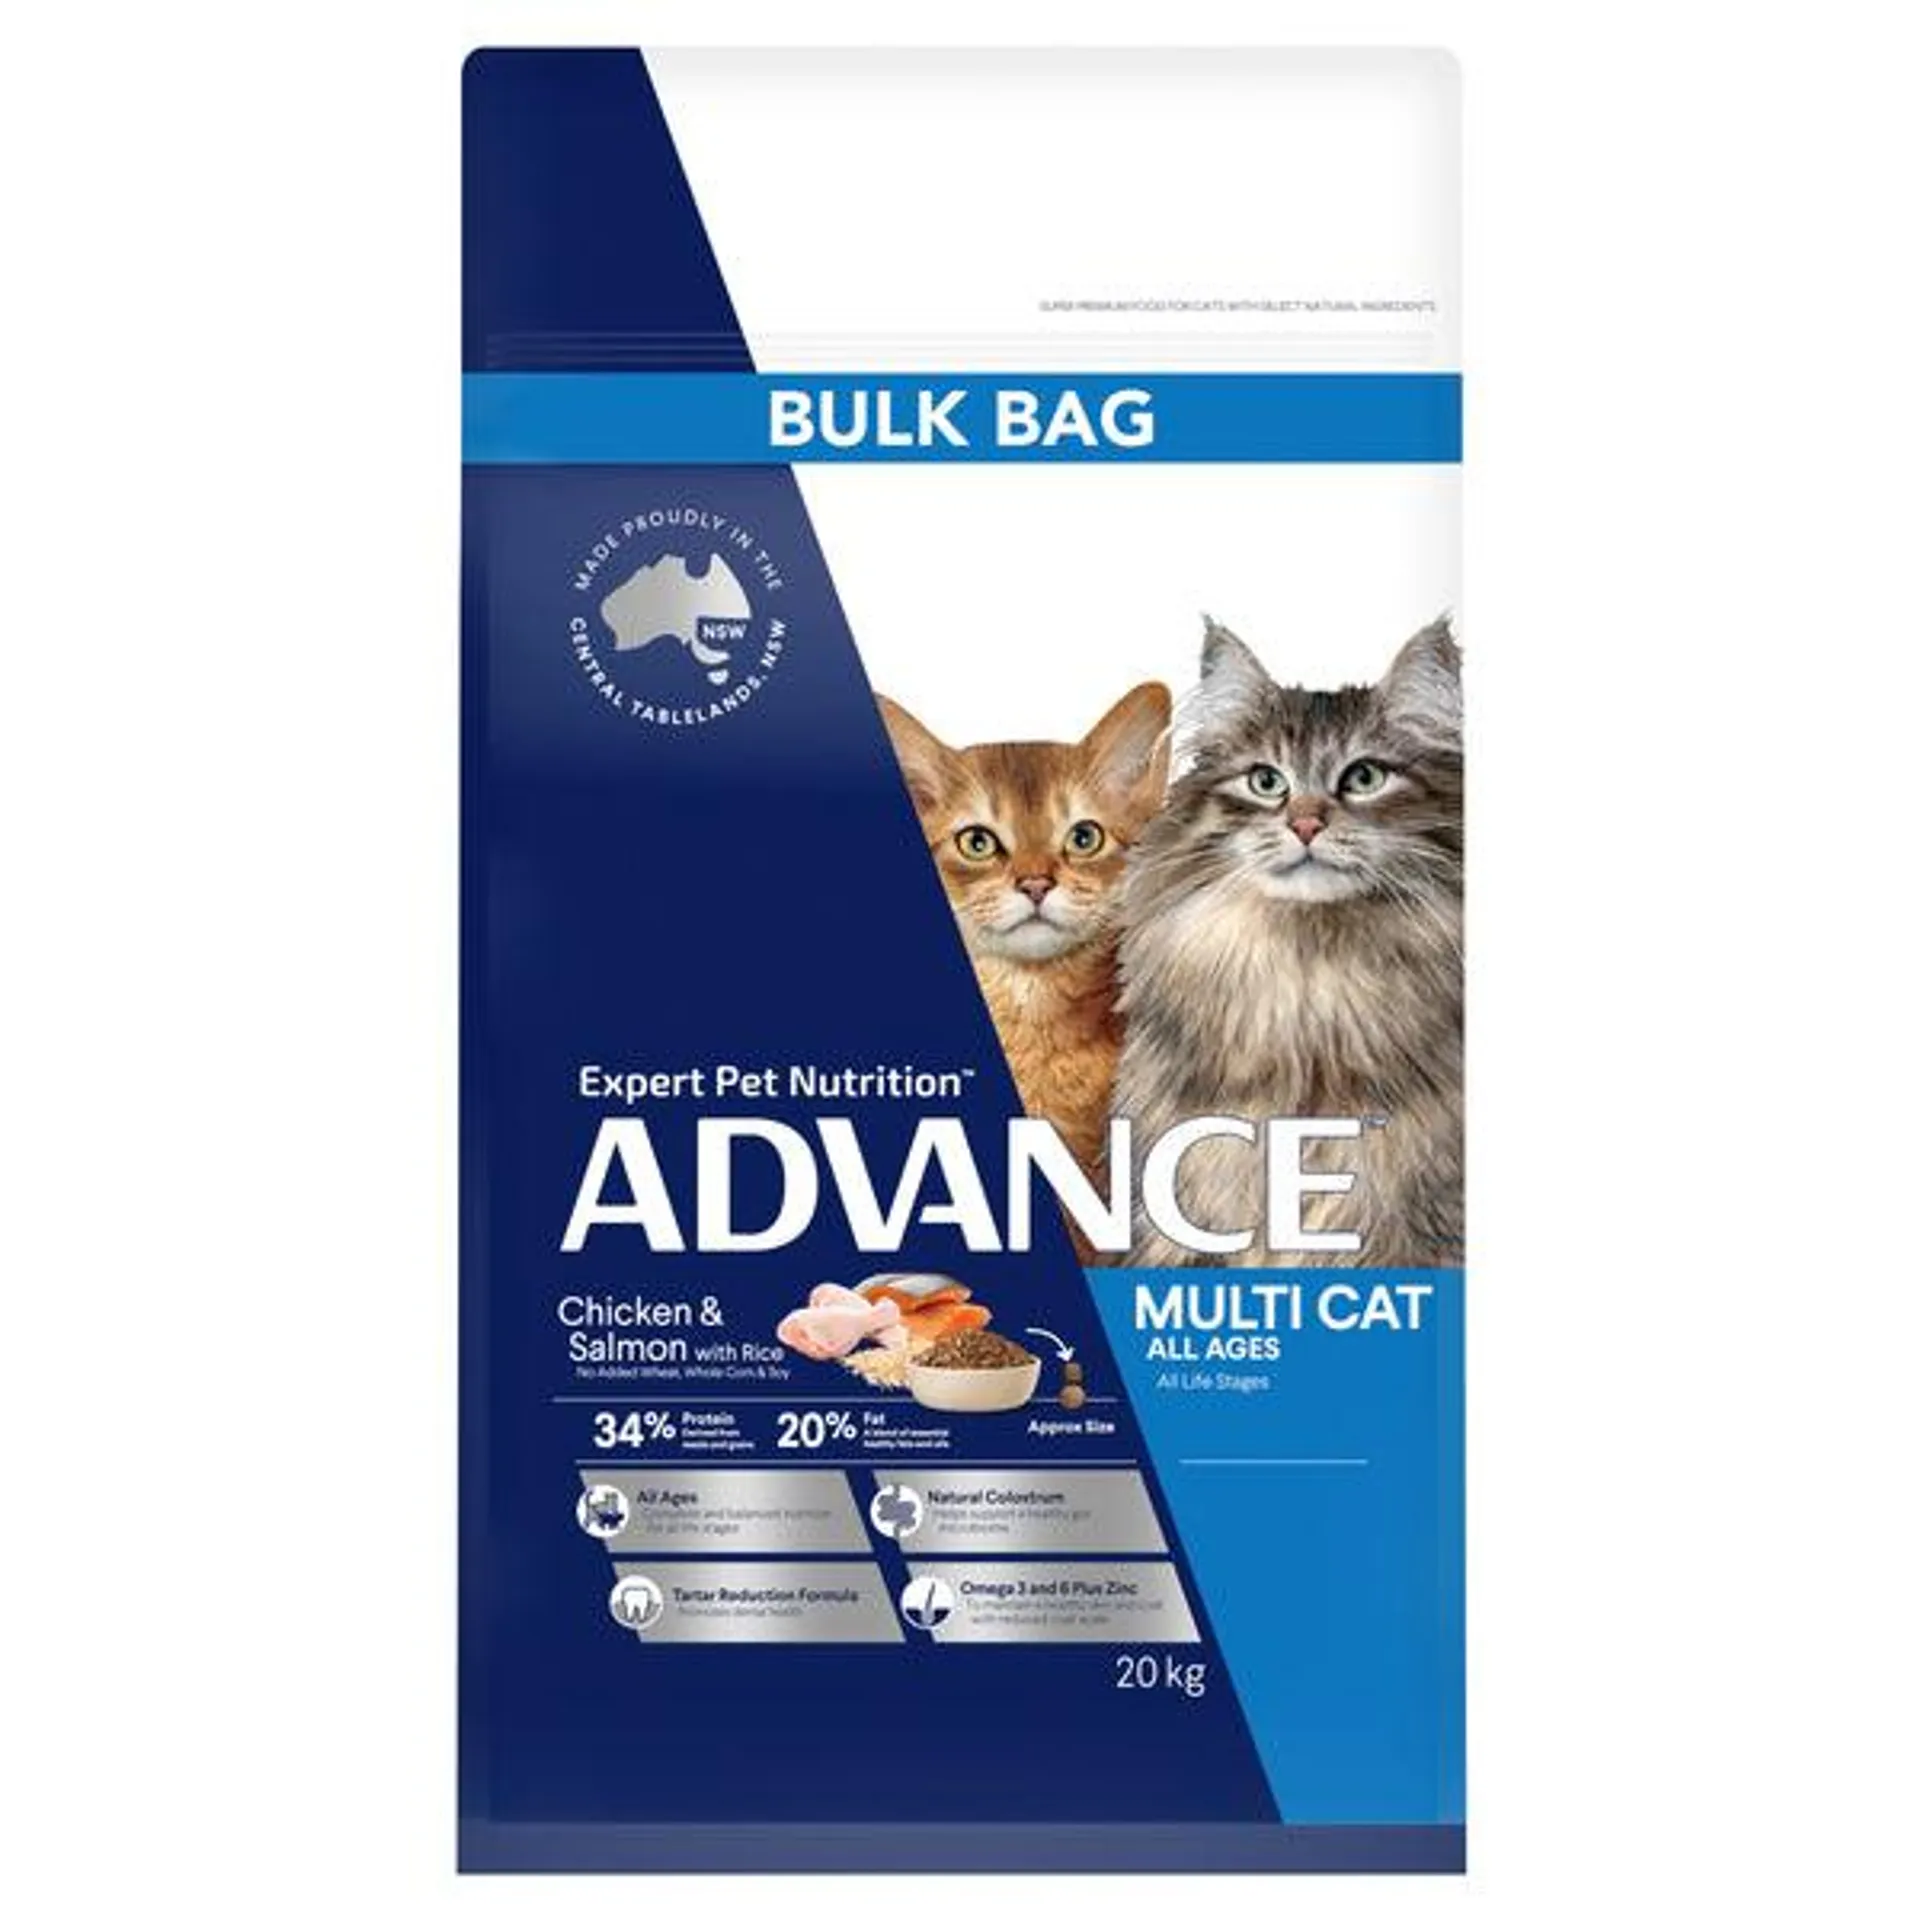 ADVANCE - Multi Cat Chicken & Salmon with Rice Dry Cat Food (20kg)